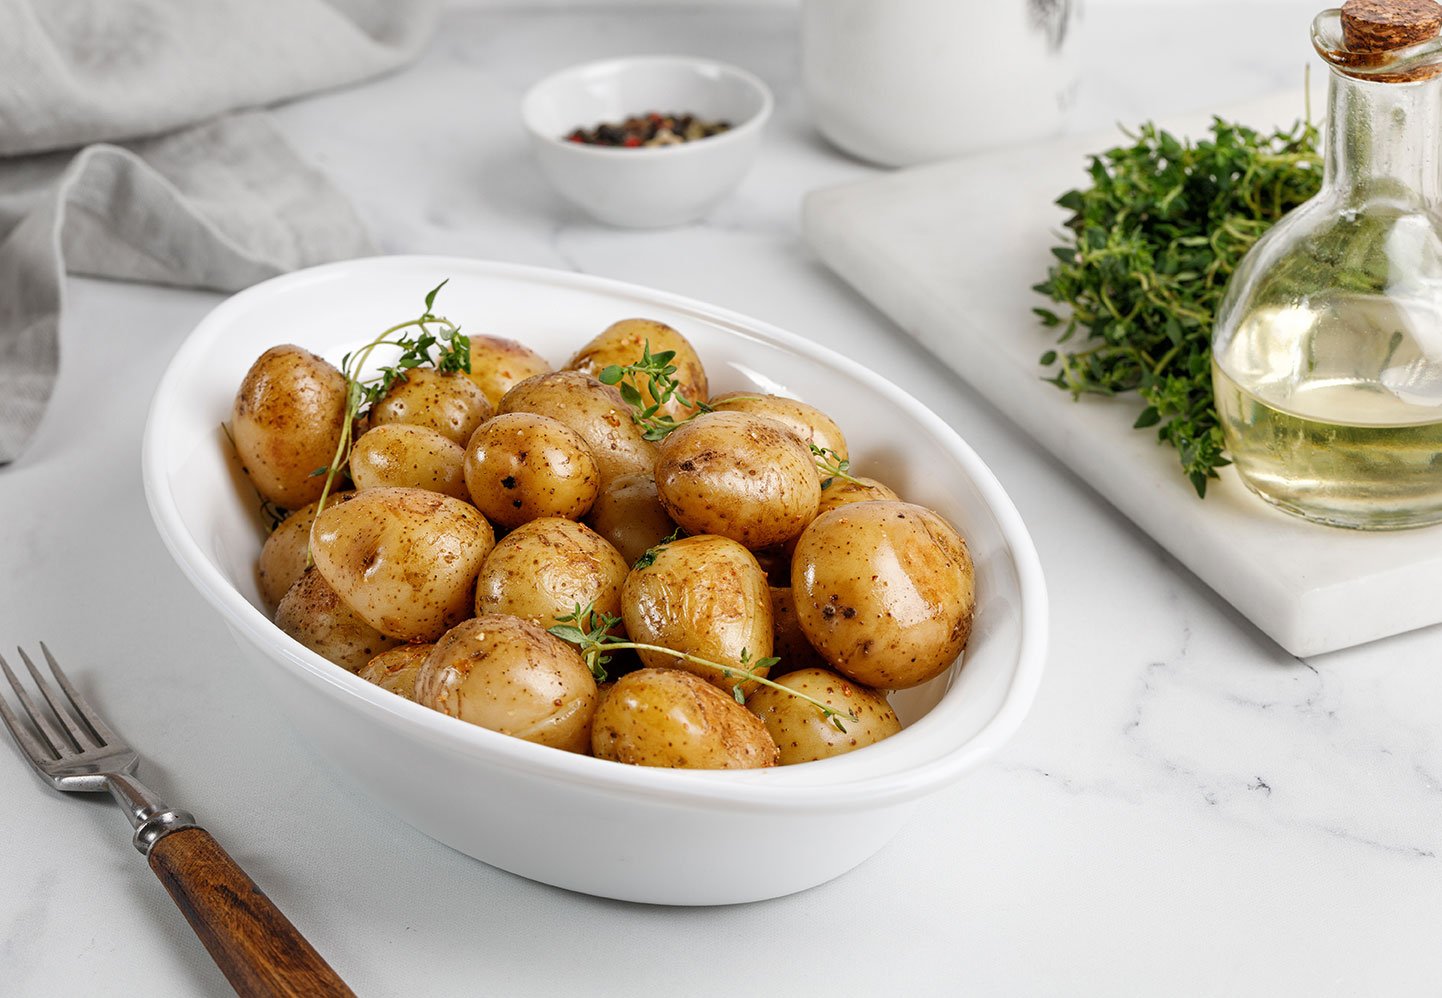 Young Roasted Baby Potato In A White Baked Dish On Mabrle Backgr